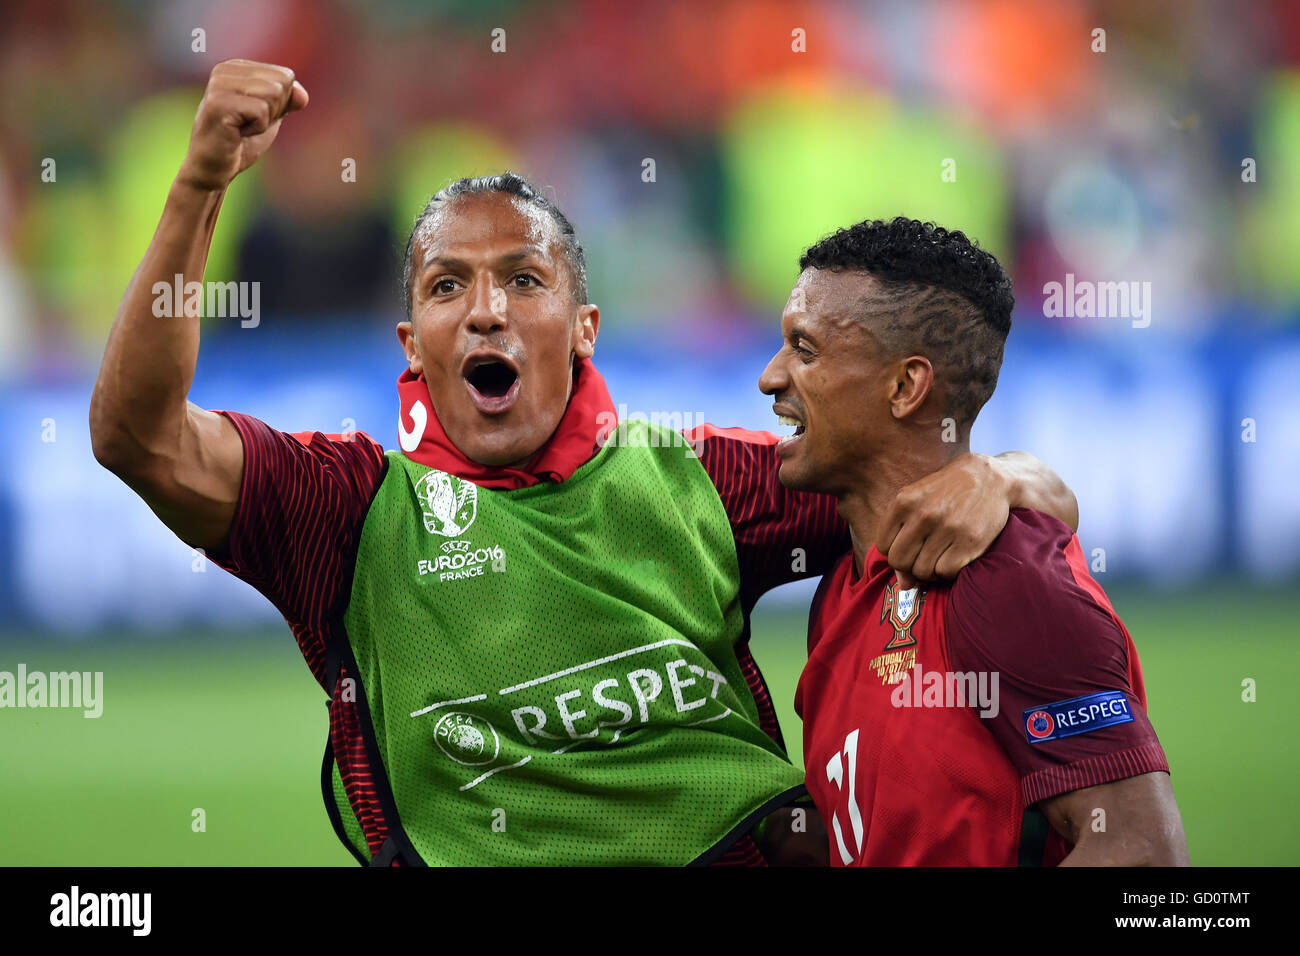 Saint-Denis, France. 10th July, 2016. Bruno Alves (L) and Nani of Portugal vie for the ball during the UEFA EURO 2016 soccer Final match between Portugal and France at the Stade de France, Saint-Denis, France, 10 July 2016. Photo: Federico Gambarini/dpa Credit:  dpa picture alliance/Alamy Live News Stock Photo